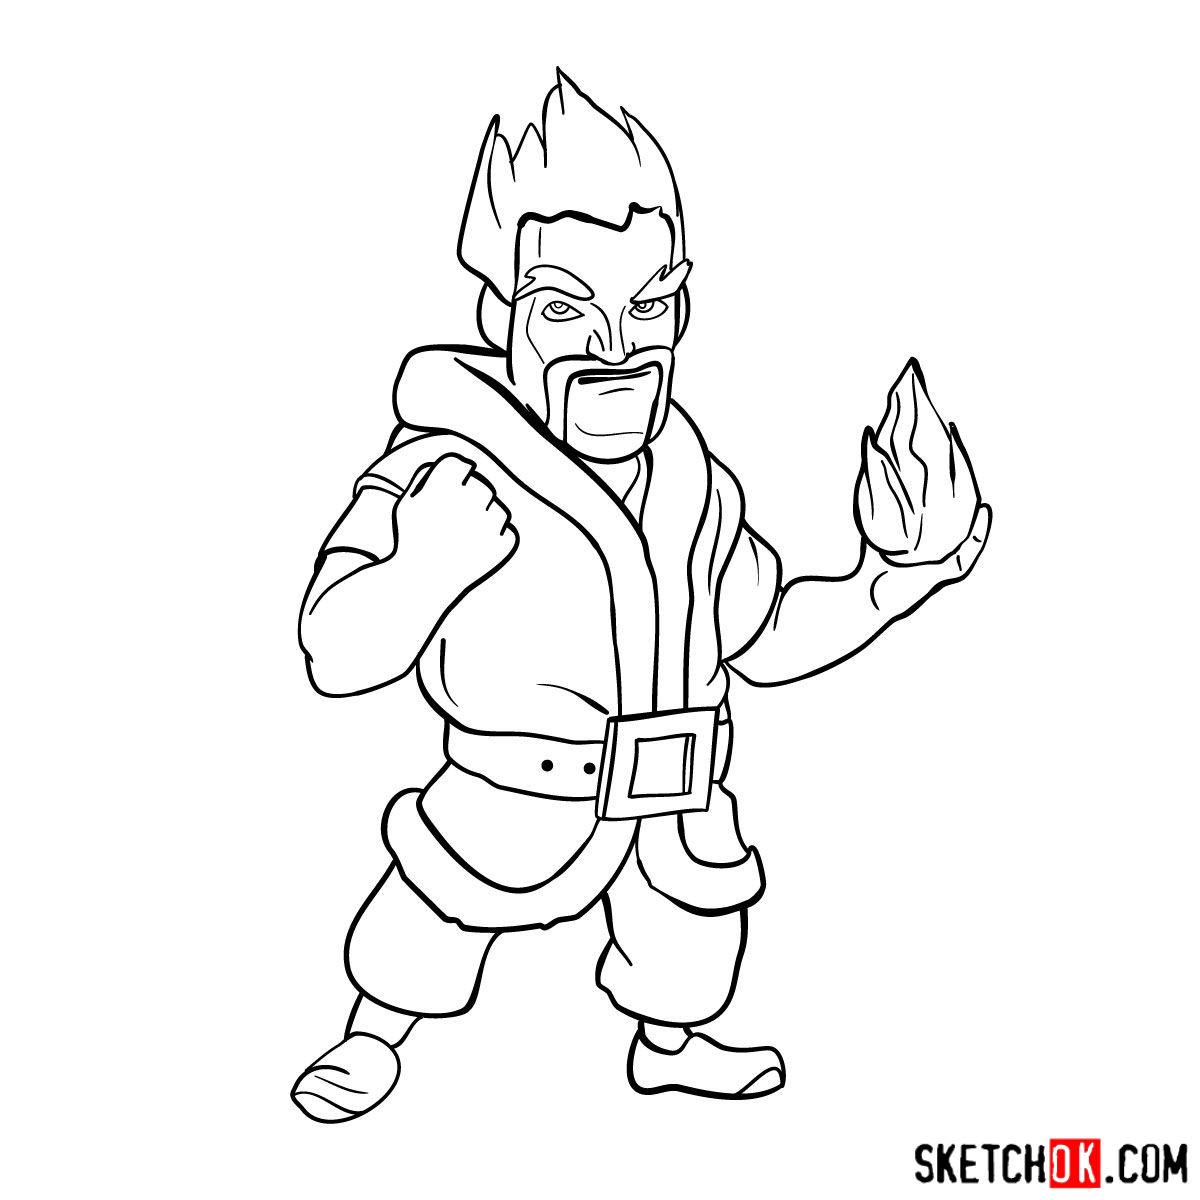 How to draw Ice Wizard from Clash of Clans - step 13